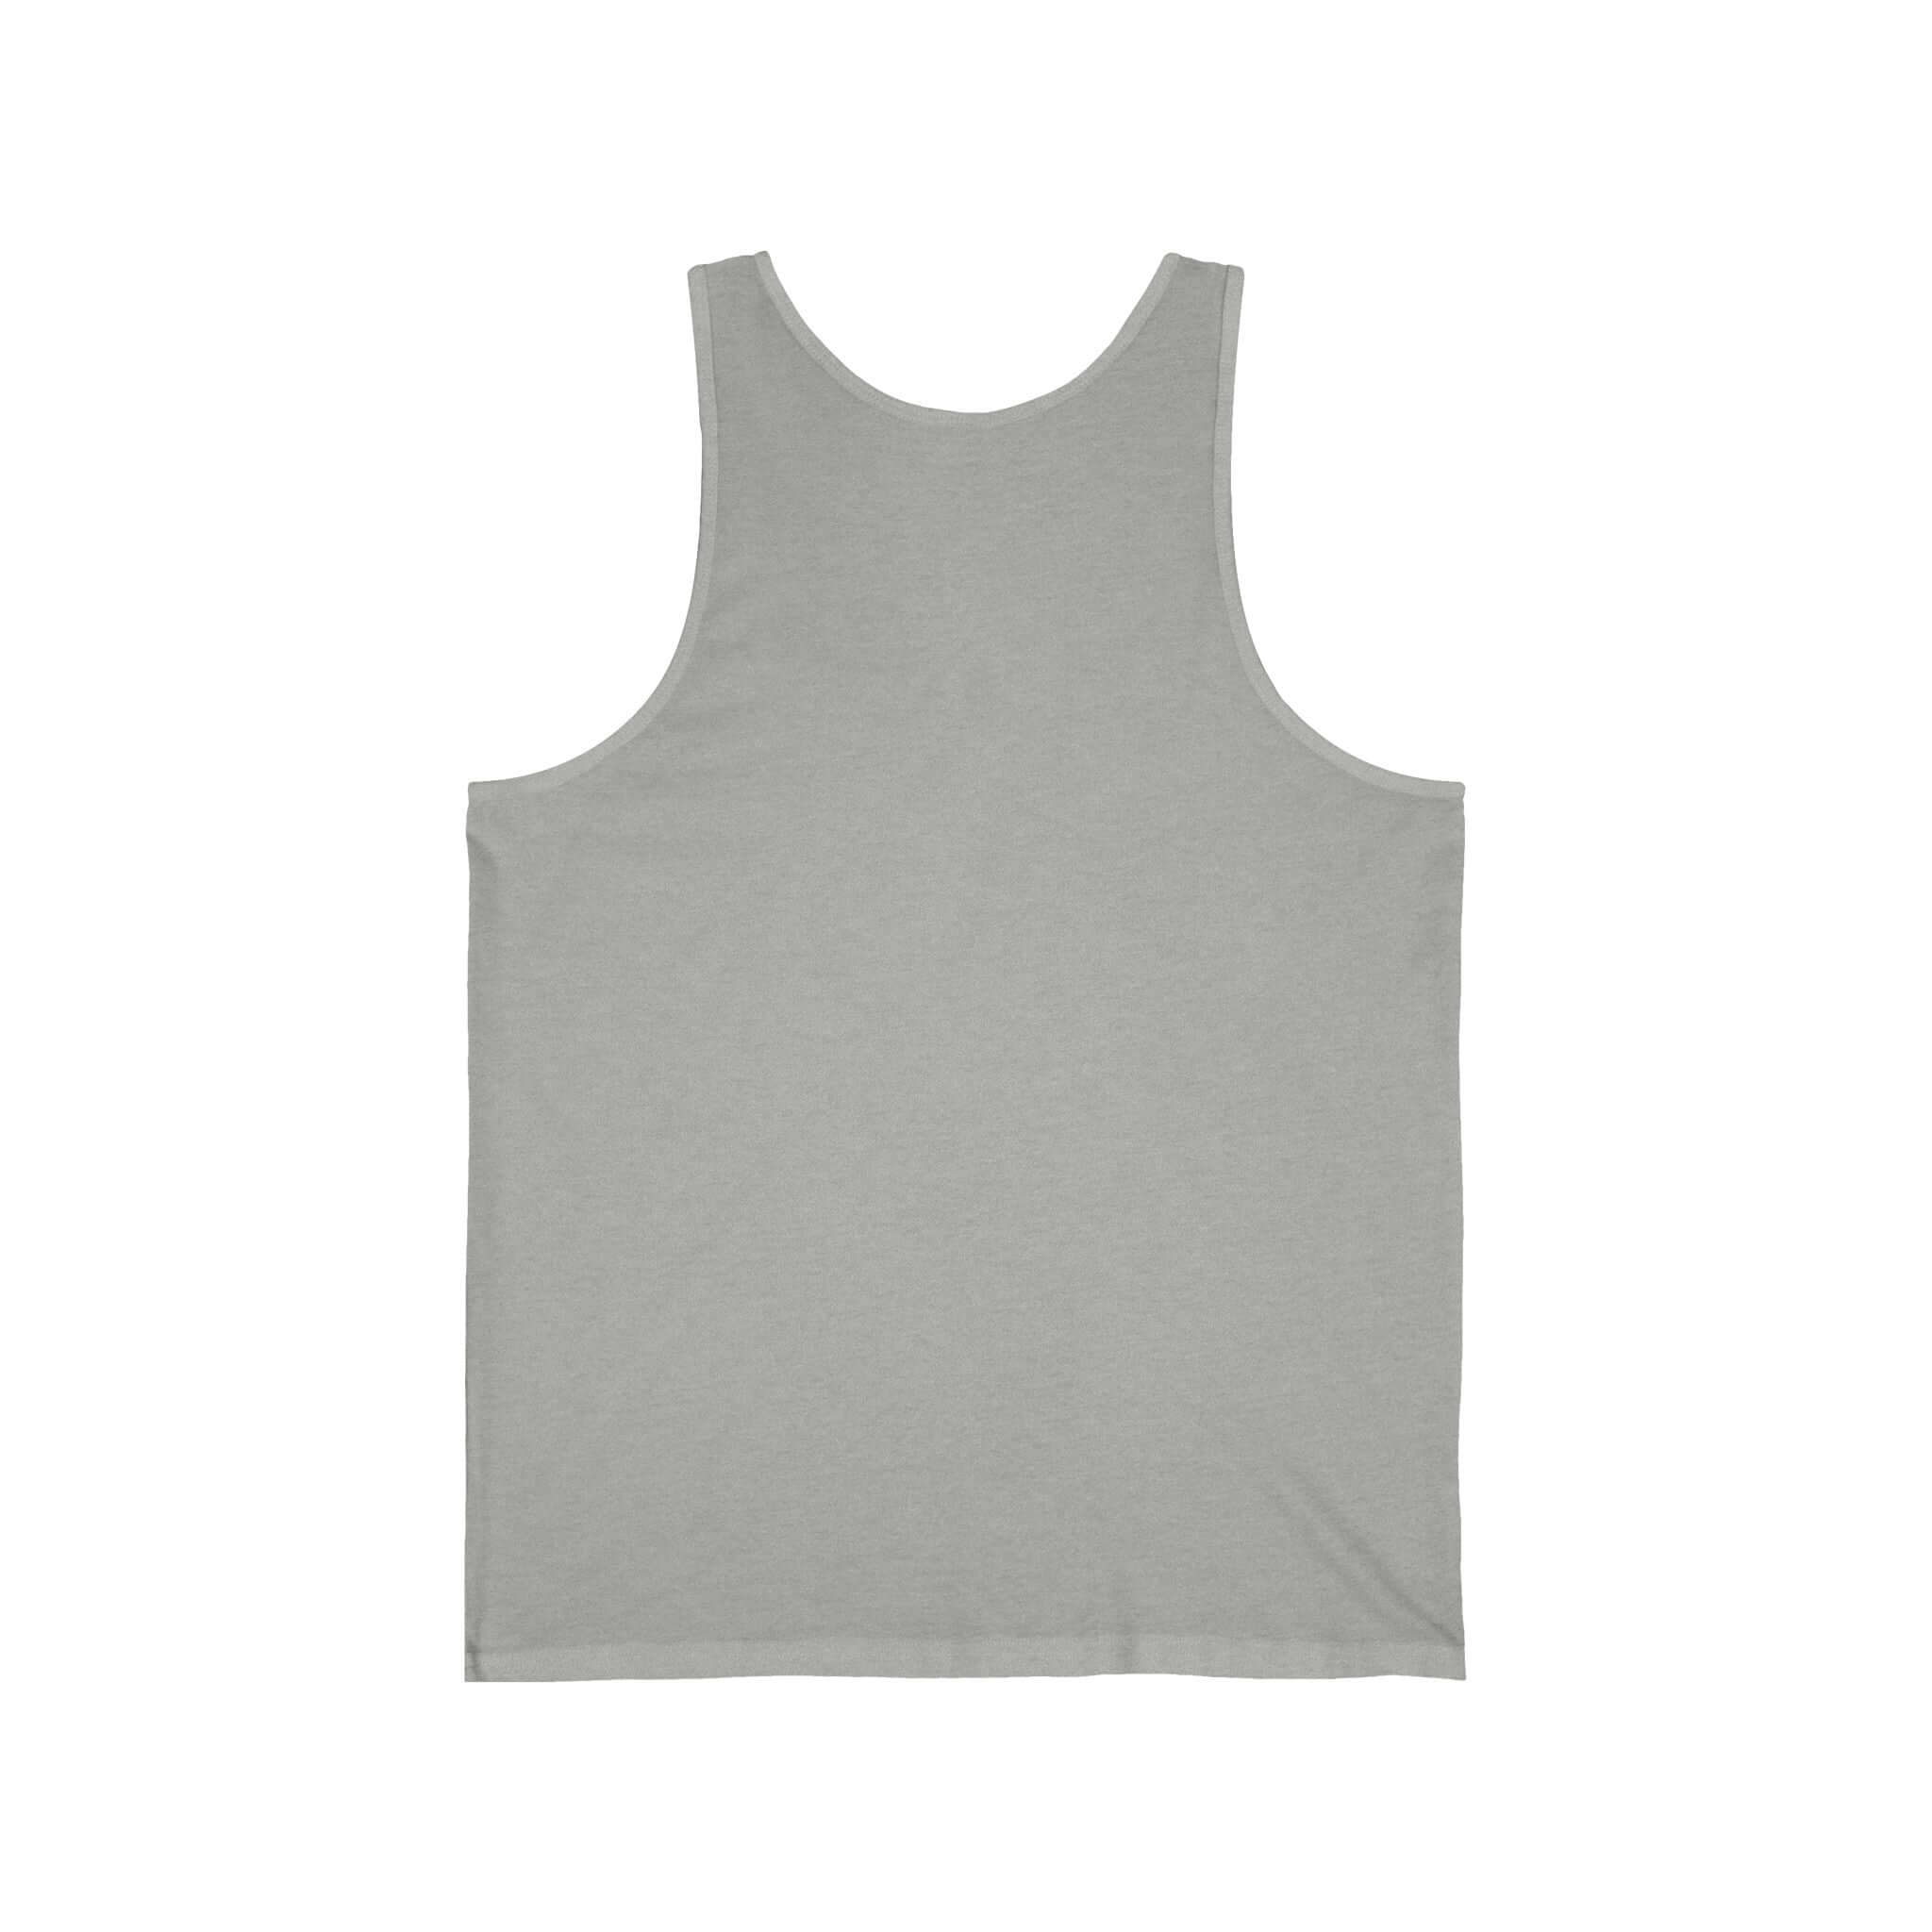 Earthbound Outdoors Unisex Athletic Tank